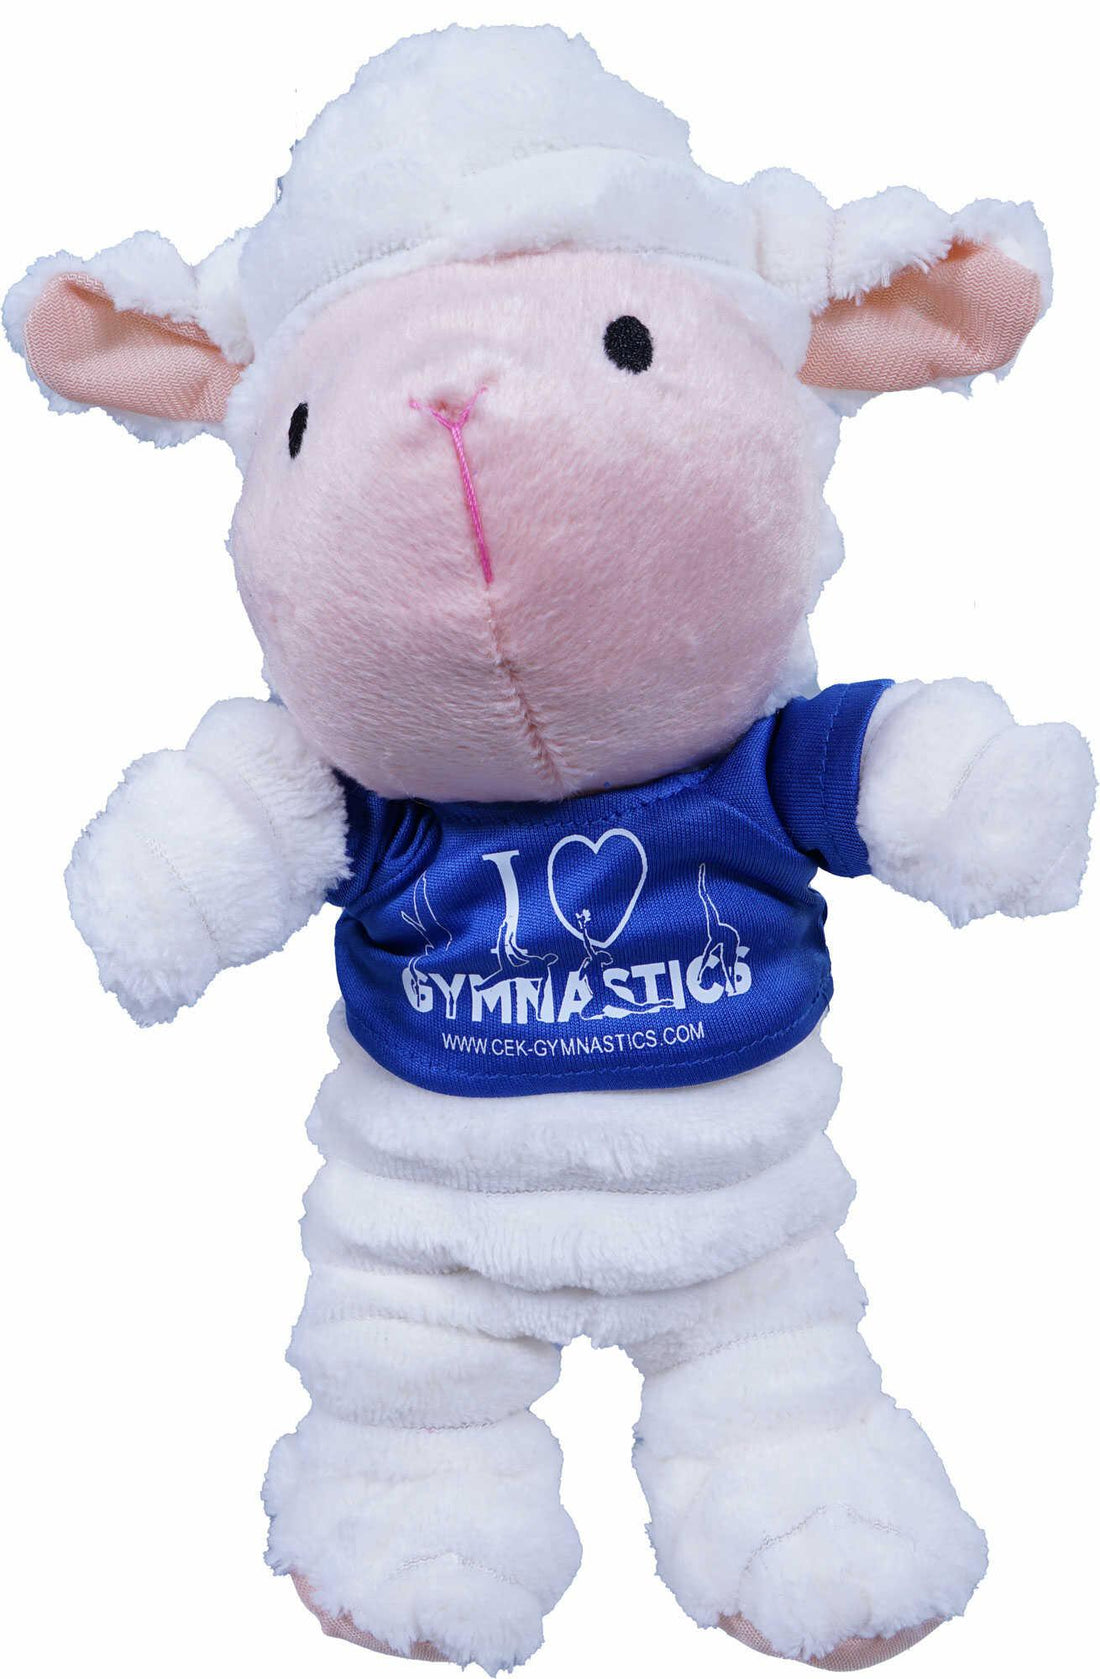 Sheep cuddly toy with promo t-shirt